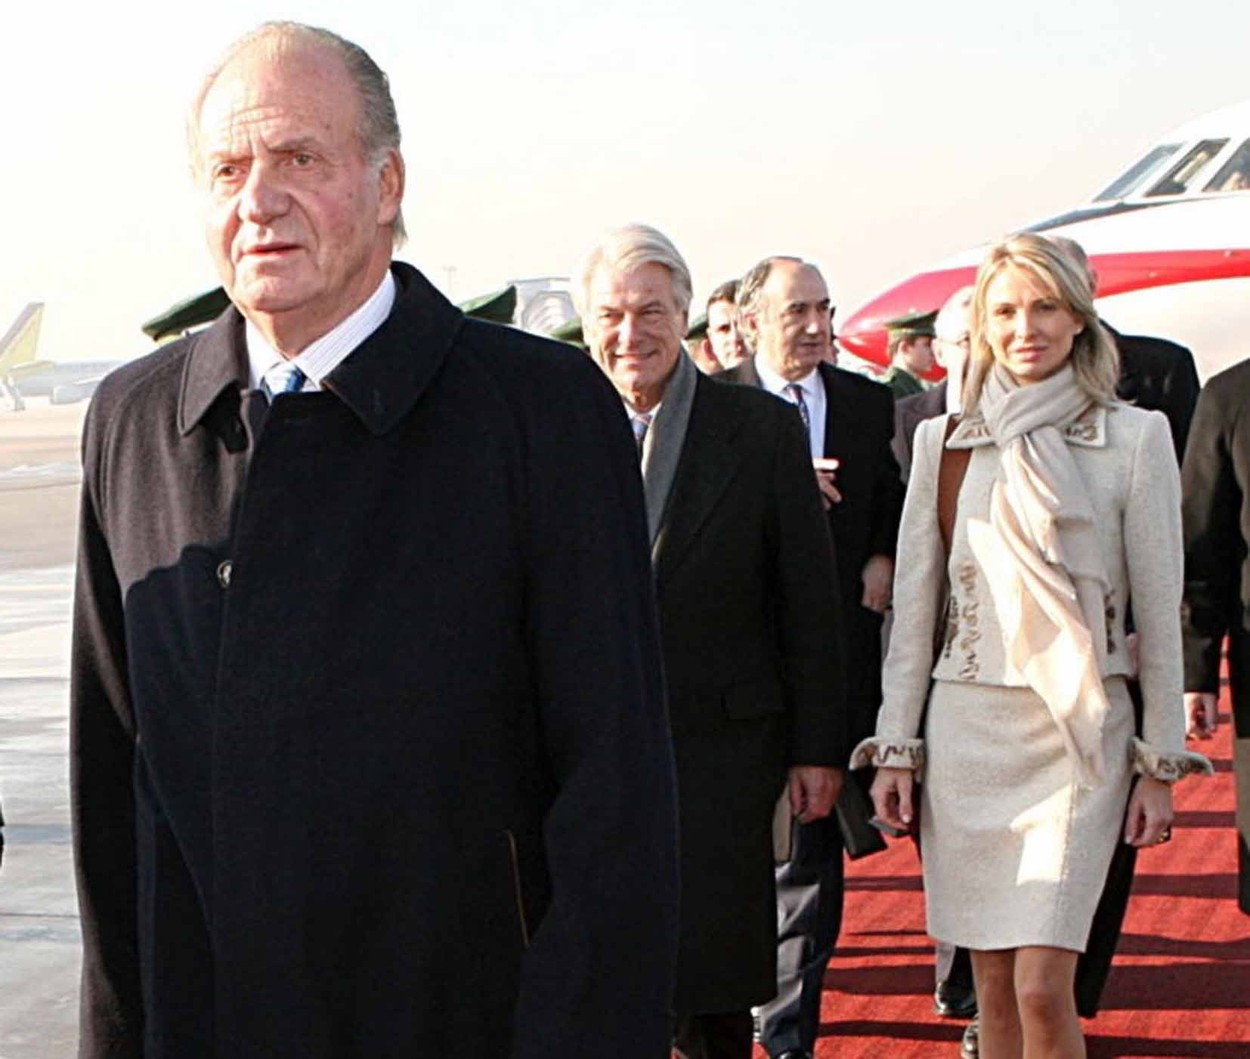 KING JUAN CARLOS OF SPAIN AND CORINNA ZU SAYN-WITTGENSTEIN.
PHOTO OF THE KING JUAN CARLOS OF SPAIN WITH HIS SO TOLD LOVE AFFAIR BEHIND HIM, CORINNA ZU SAYN-WITTGENSTEIN, WHO IS RUMOURED TO BE EVEN LIVING WITH CLOSE TO HIM.
THIS IMAGE, TAKEN ON 2nd FEBRUARY 2006 AT THE AIRPORTOF STUTTGART, GERMANY, DEMONSTRATE THEY MEET FOR LONG, AND EVEN SEEMS THAT THEY TRAVEL TOGETHER.,Image: 127251854, License: Rights-managed, Restrictions: , Model Release: no, Credit line: BSCHOF / The Photo One / Profimedia